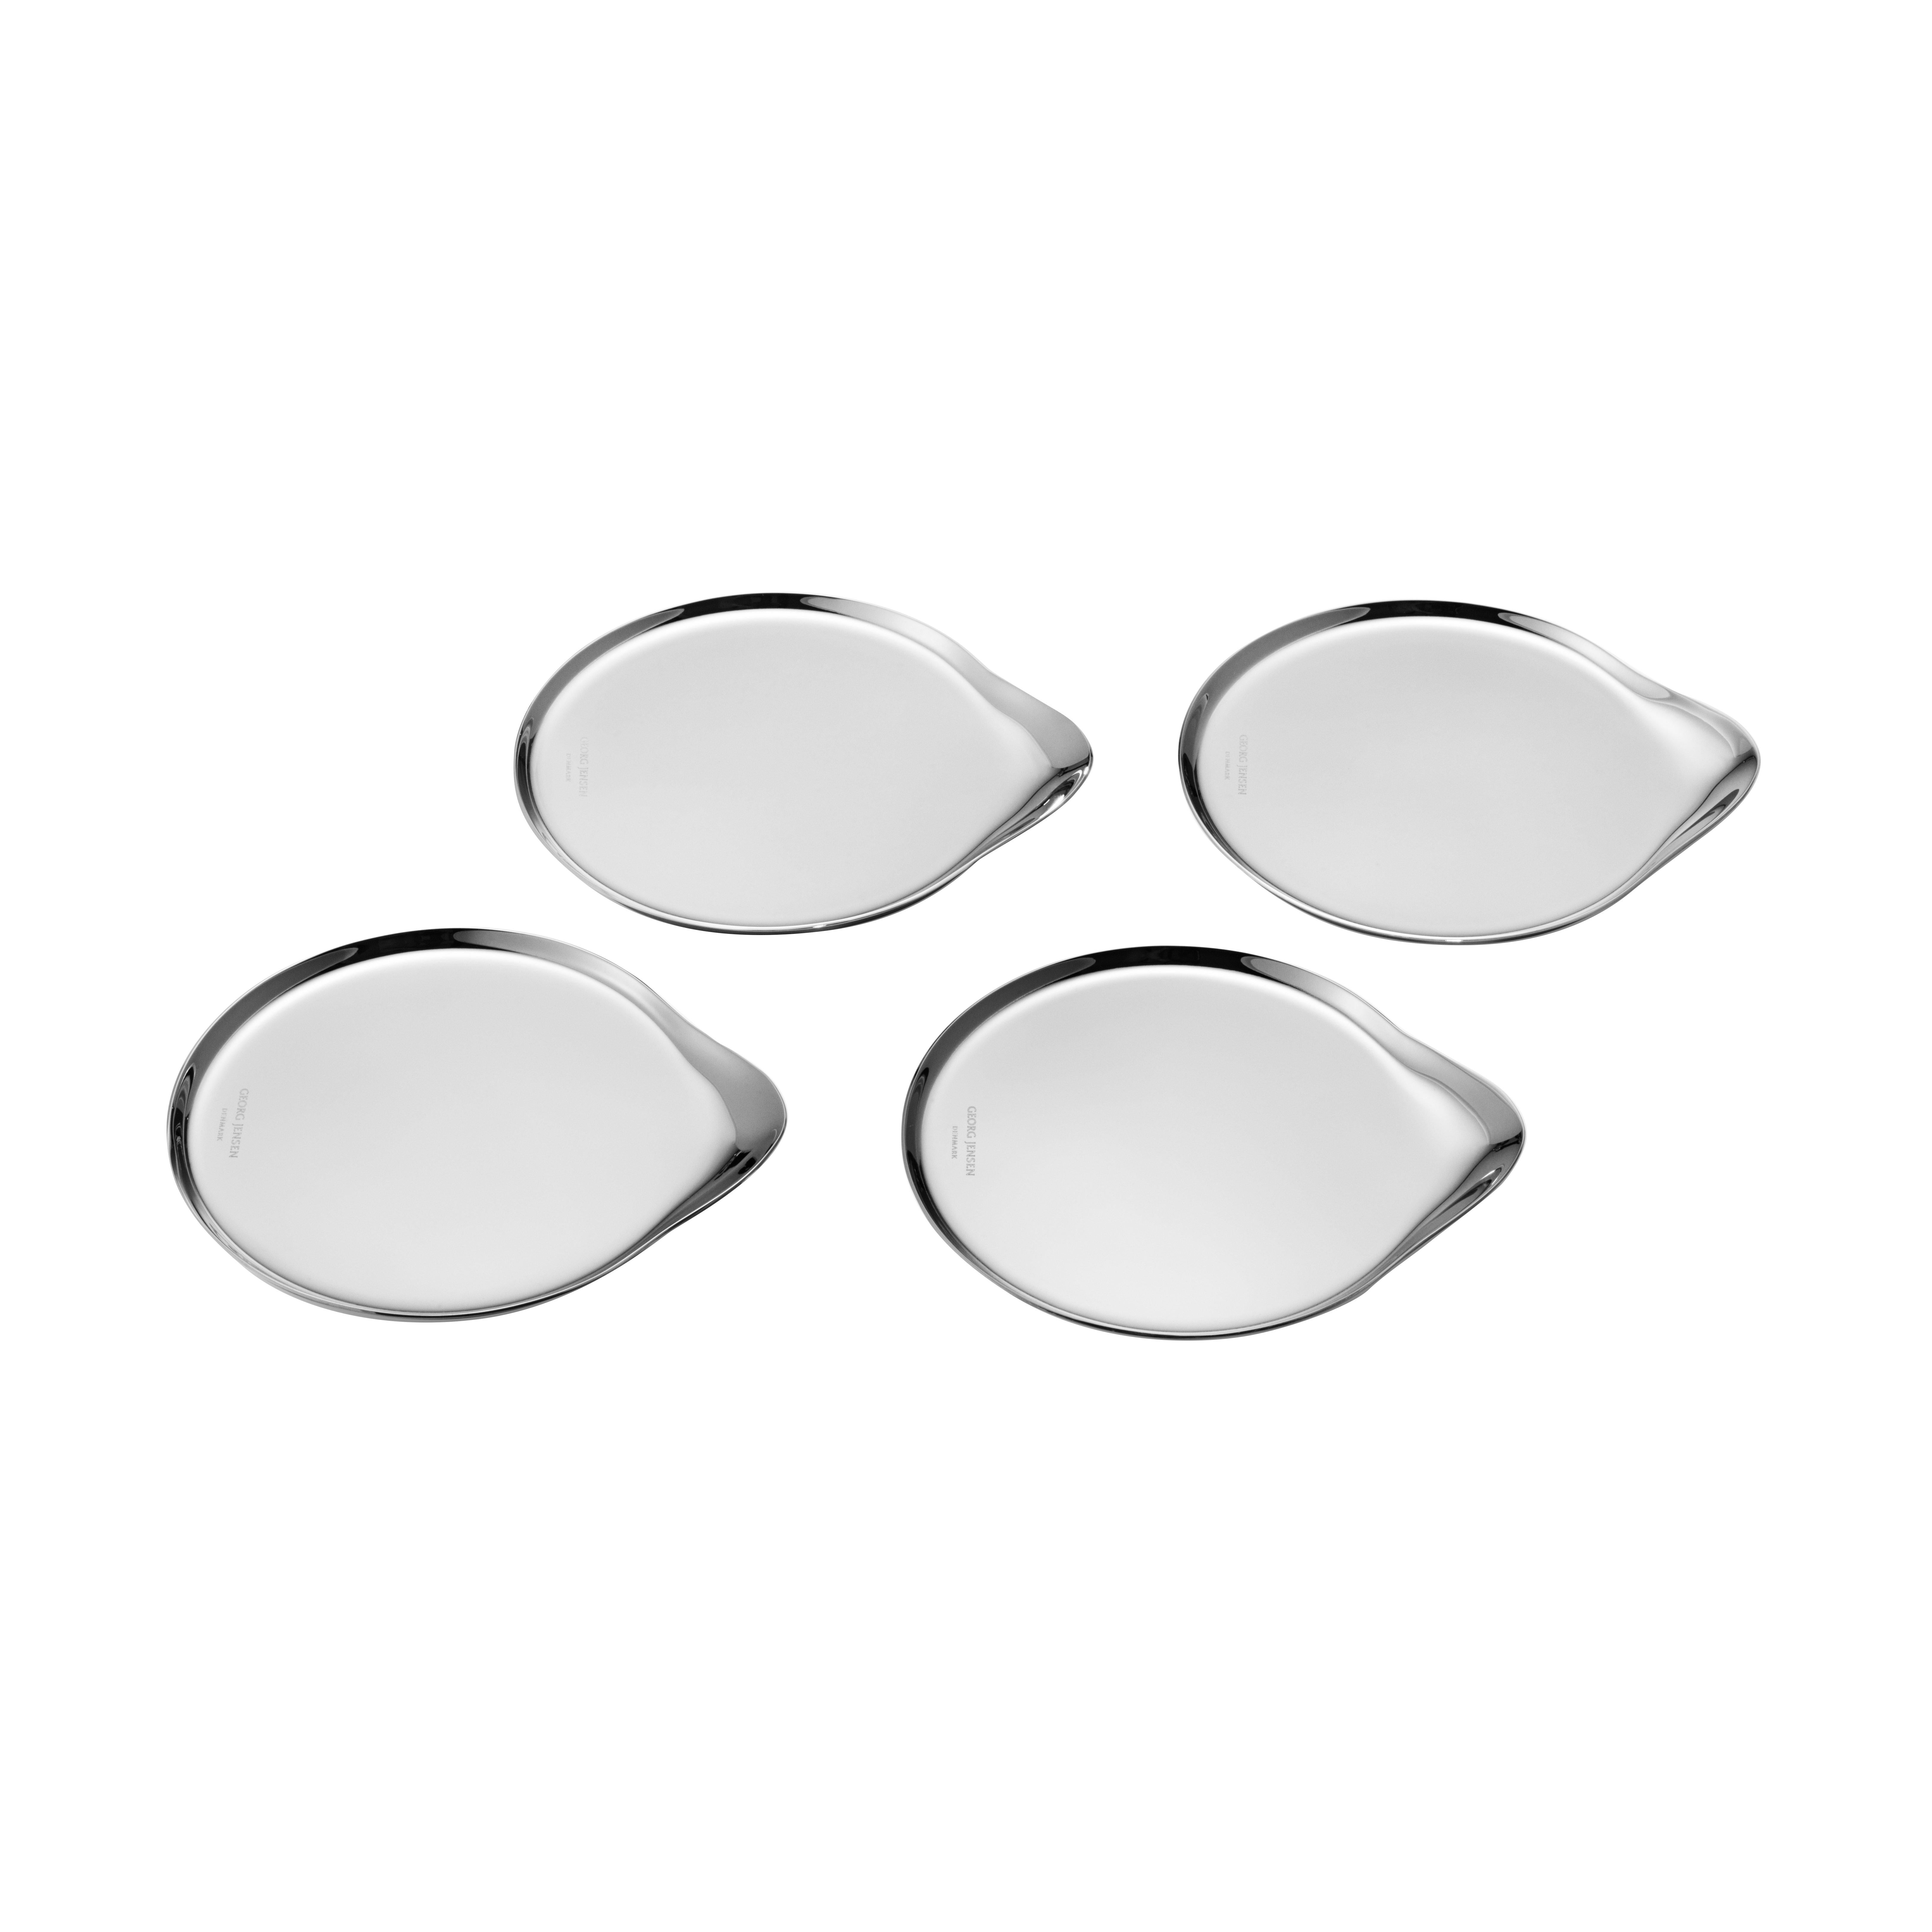 Four Wine & Bar Coasters in Stainless Steel Mirror Finish by Georg Jensen